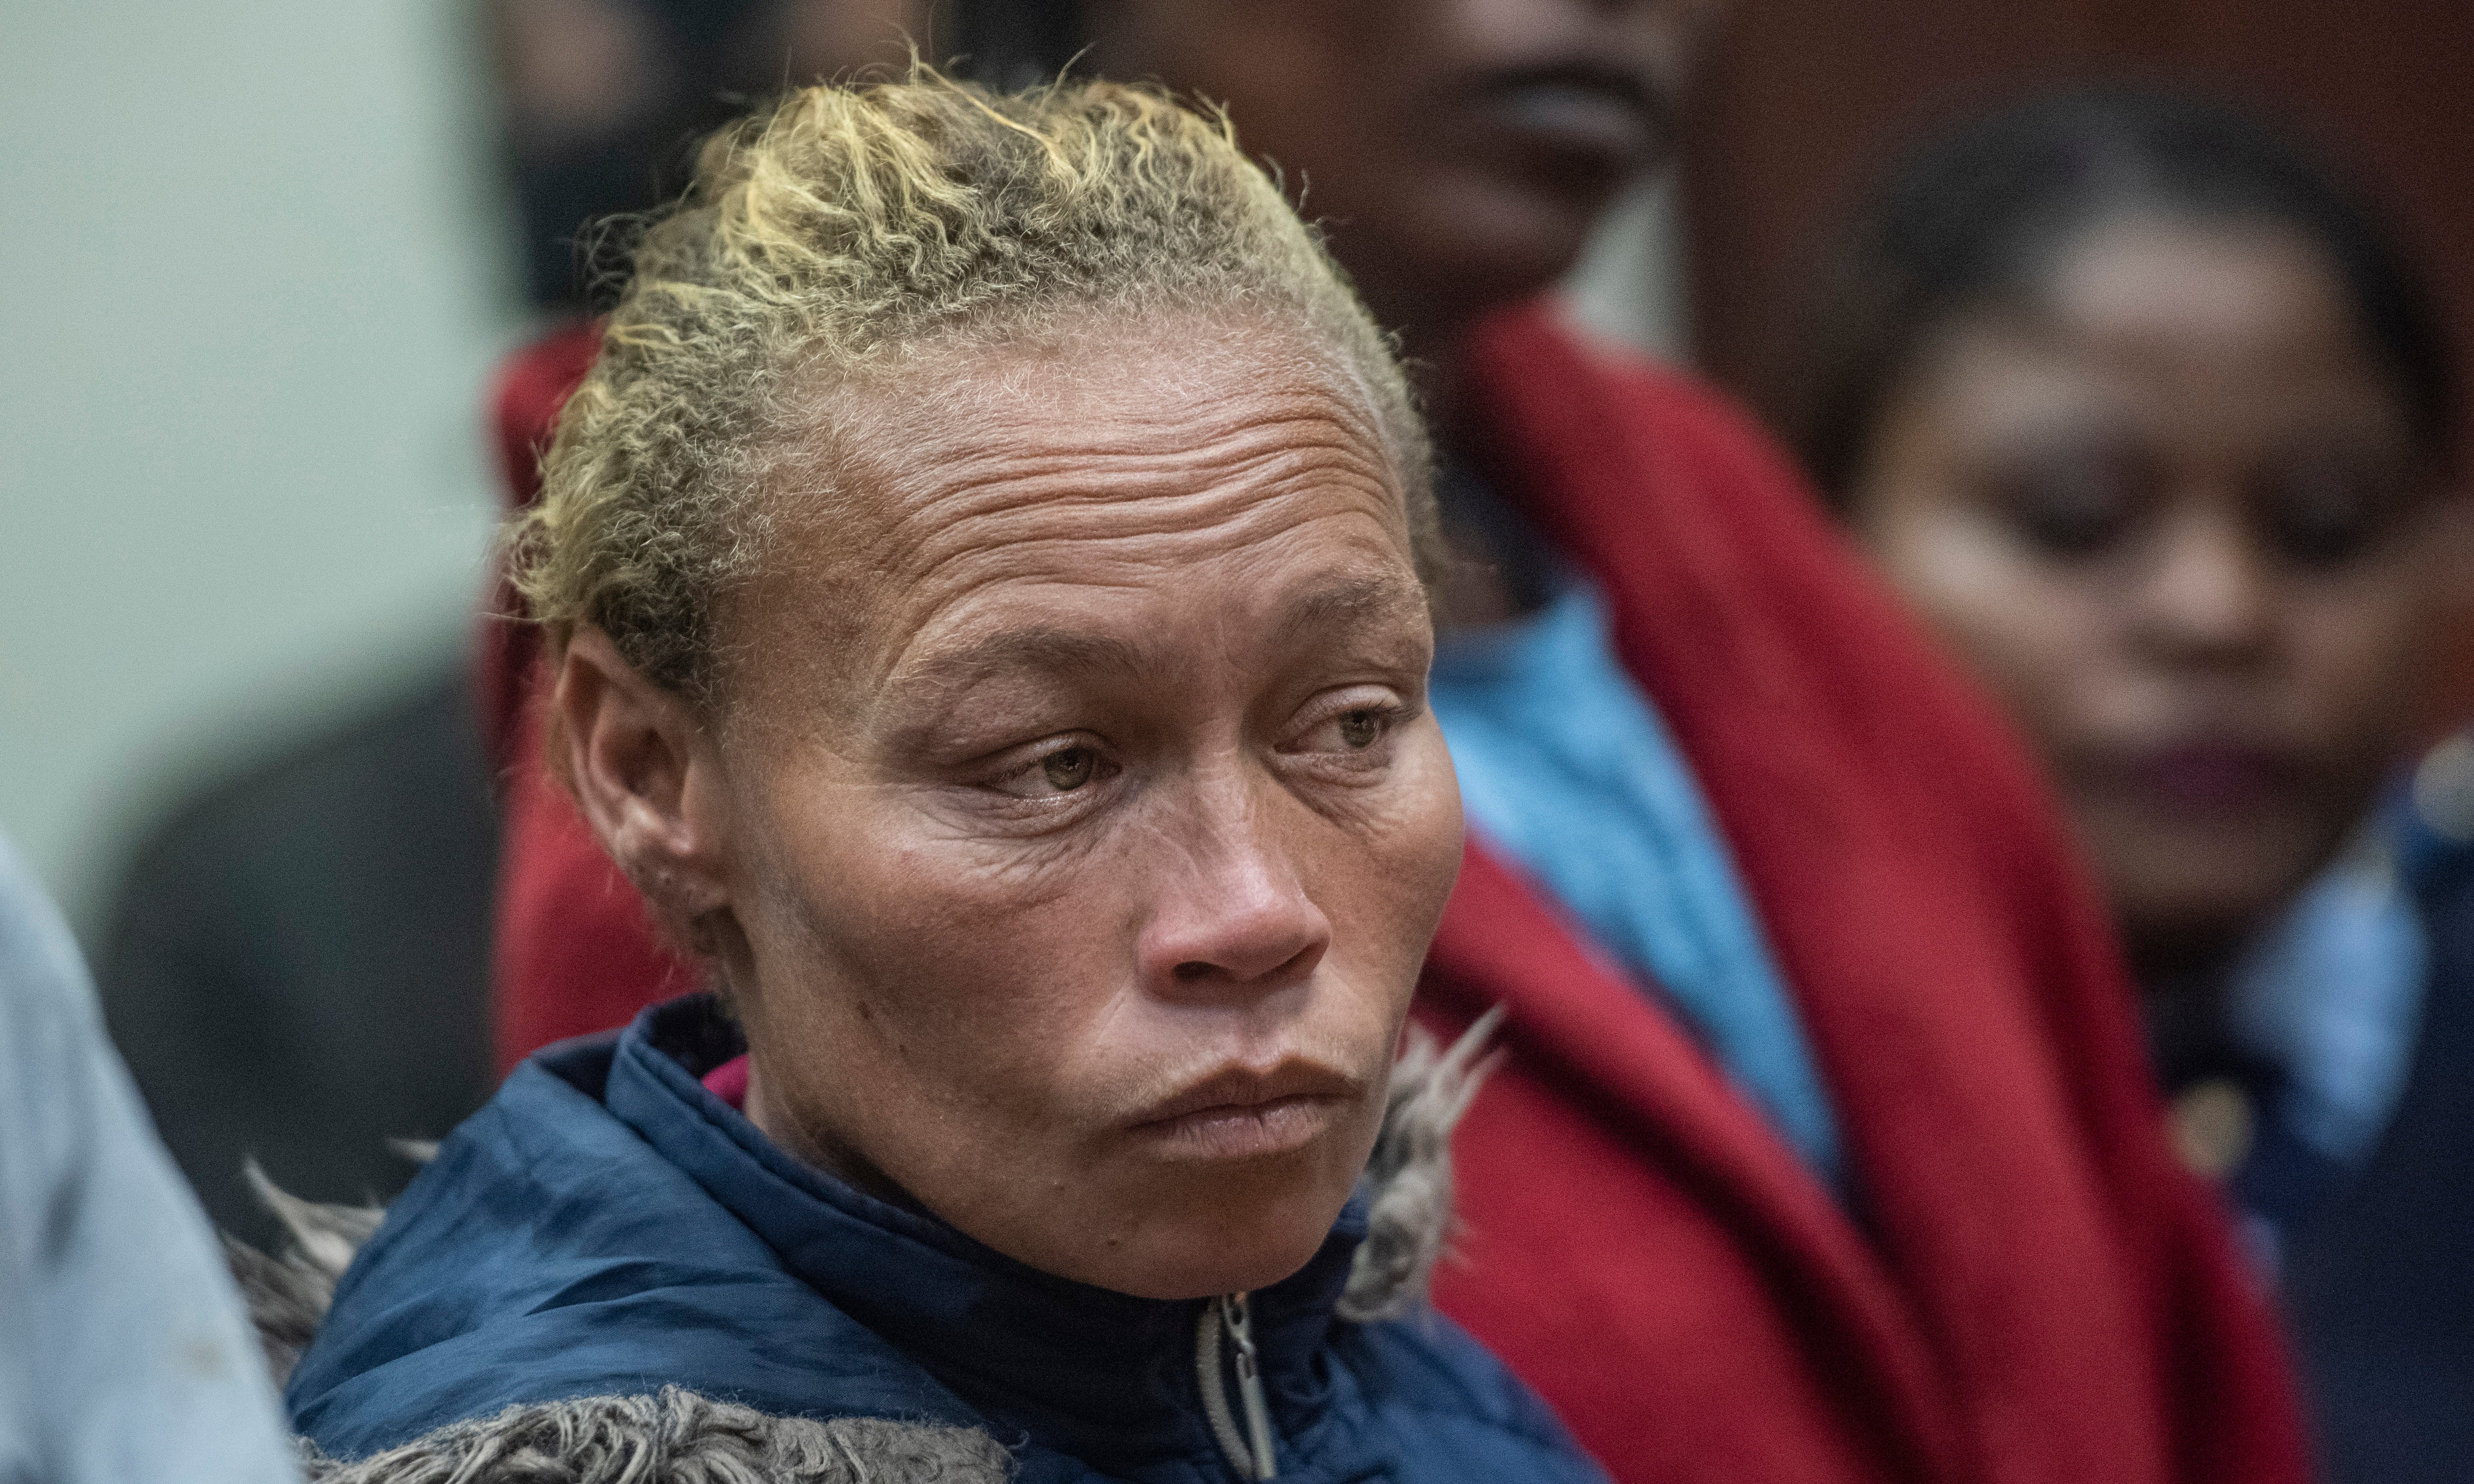 The mother of missing 6-year-old Joslin Smith, Kelly Smith, appears in court in Vredenburg, South Africa